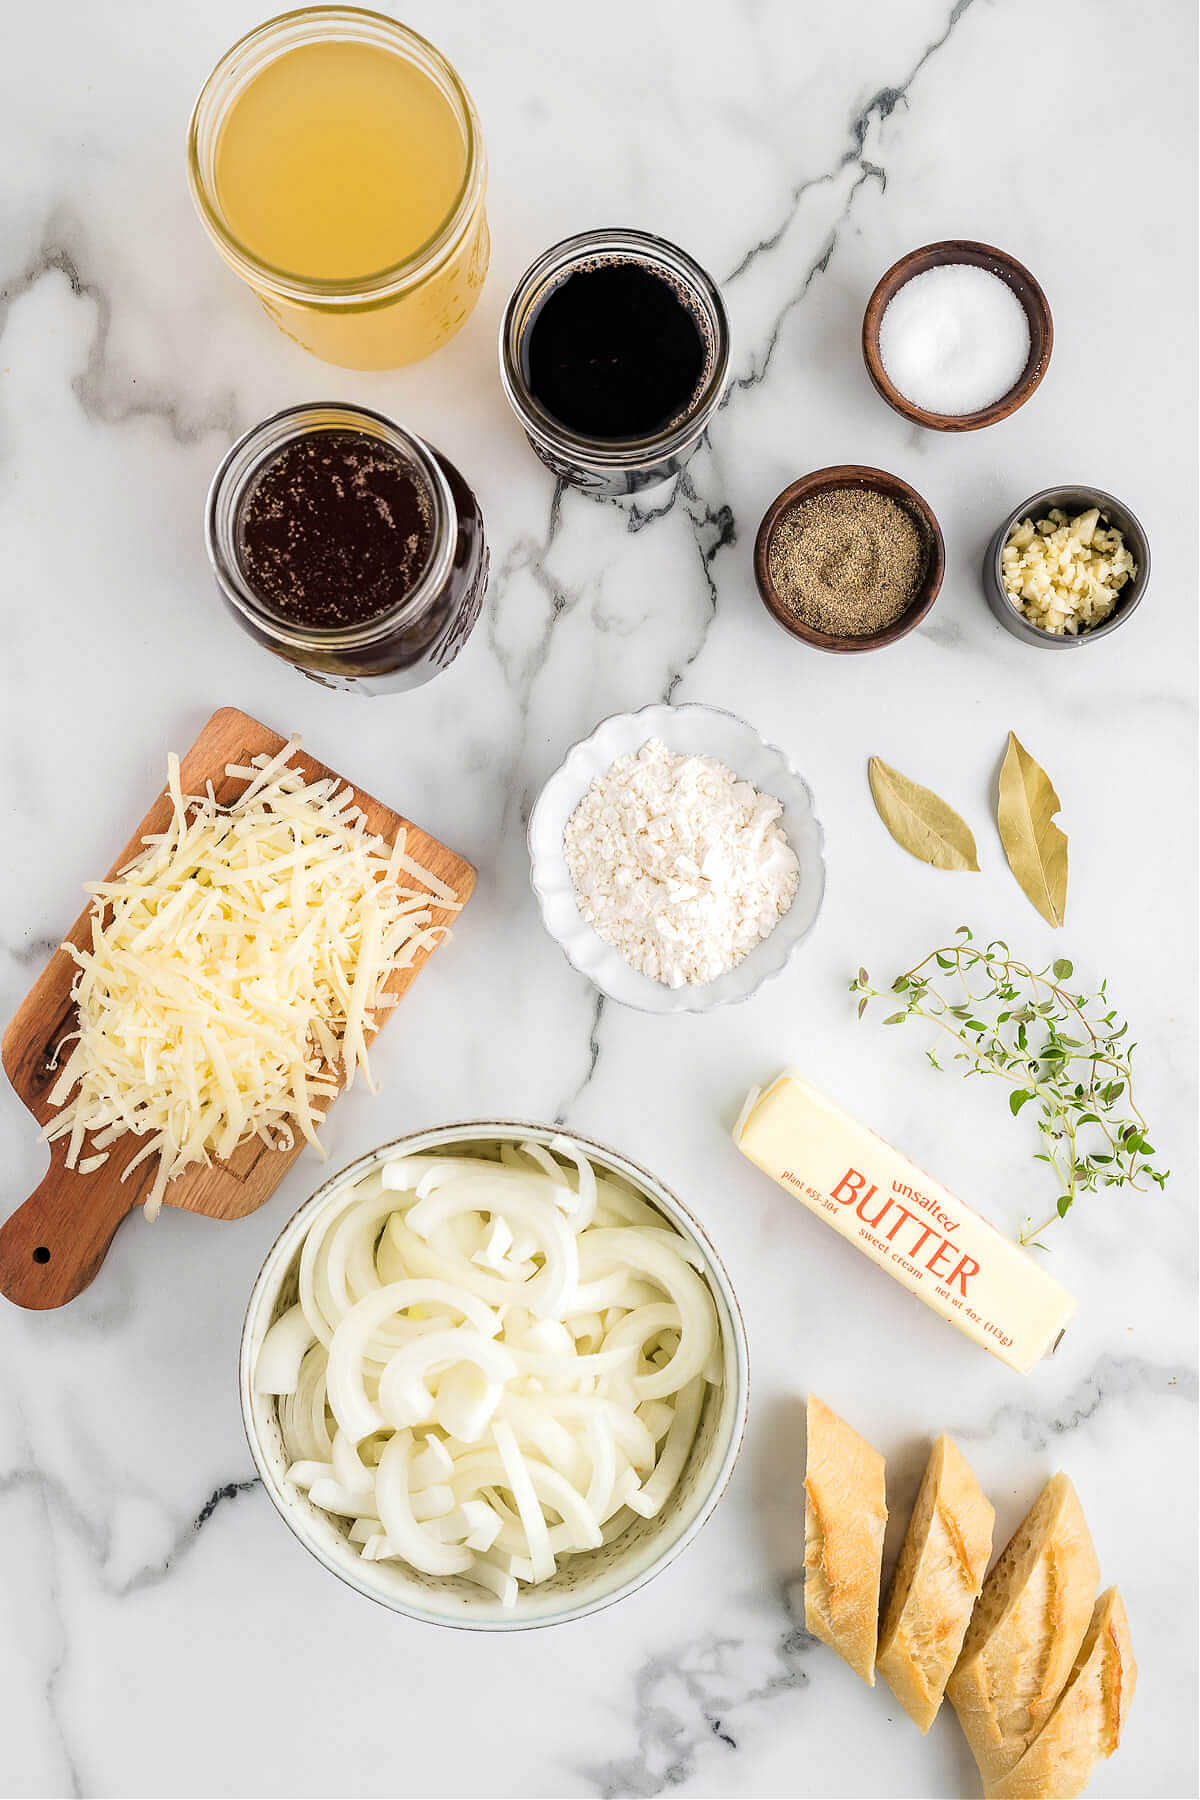 ingredients for French onion soup on a table.